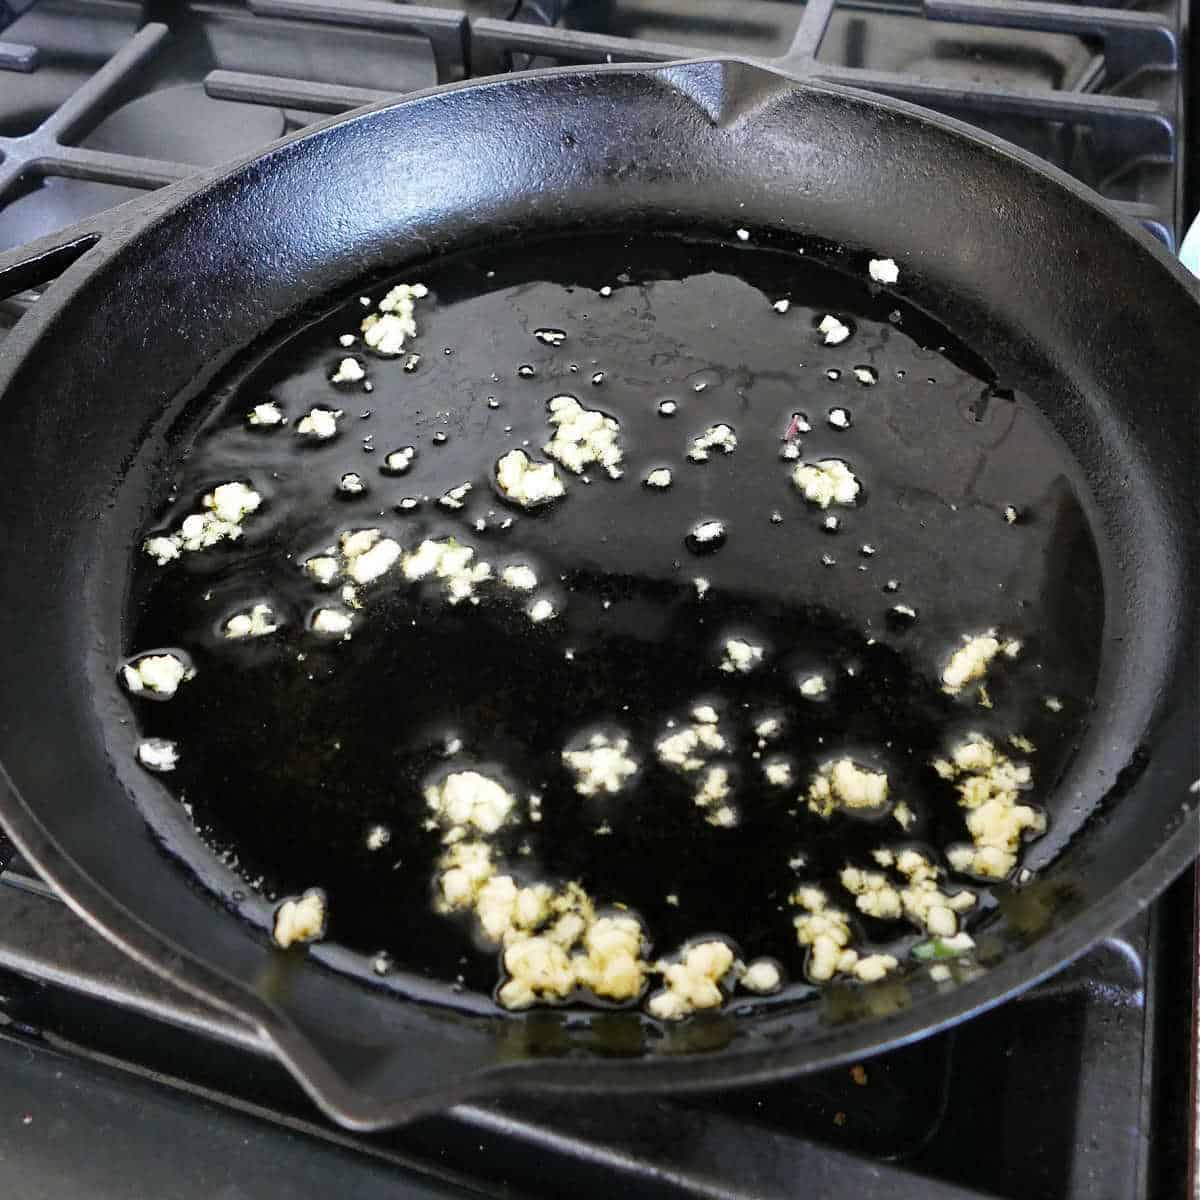 garlic cooking in olive oil in a skillet on the stove